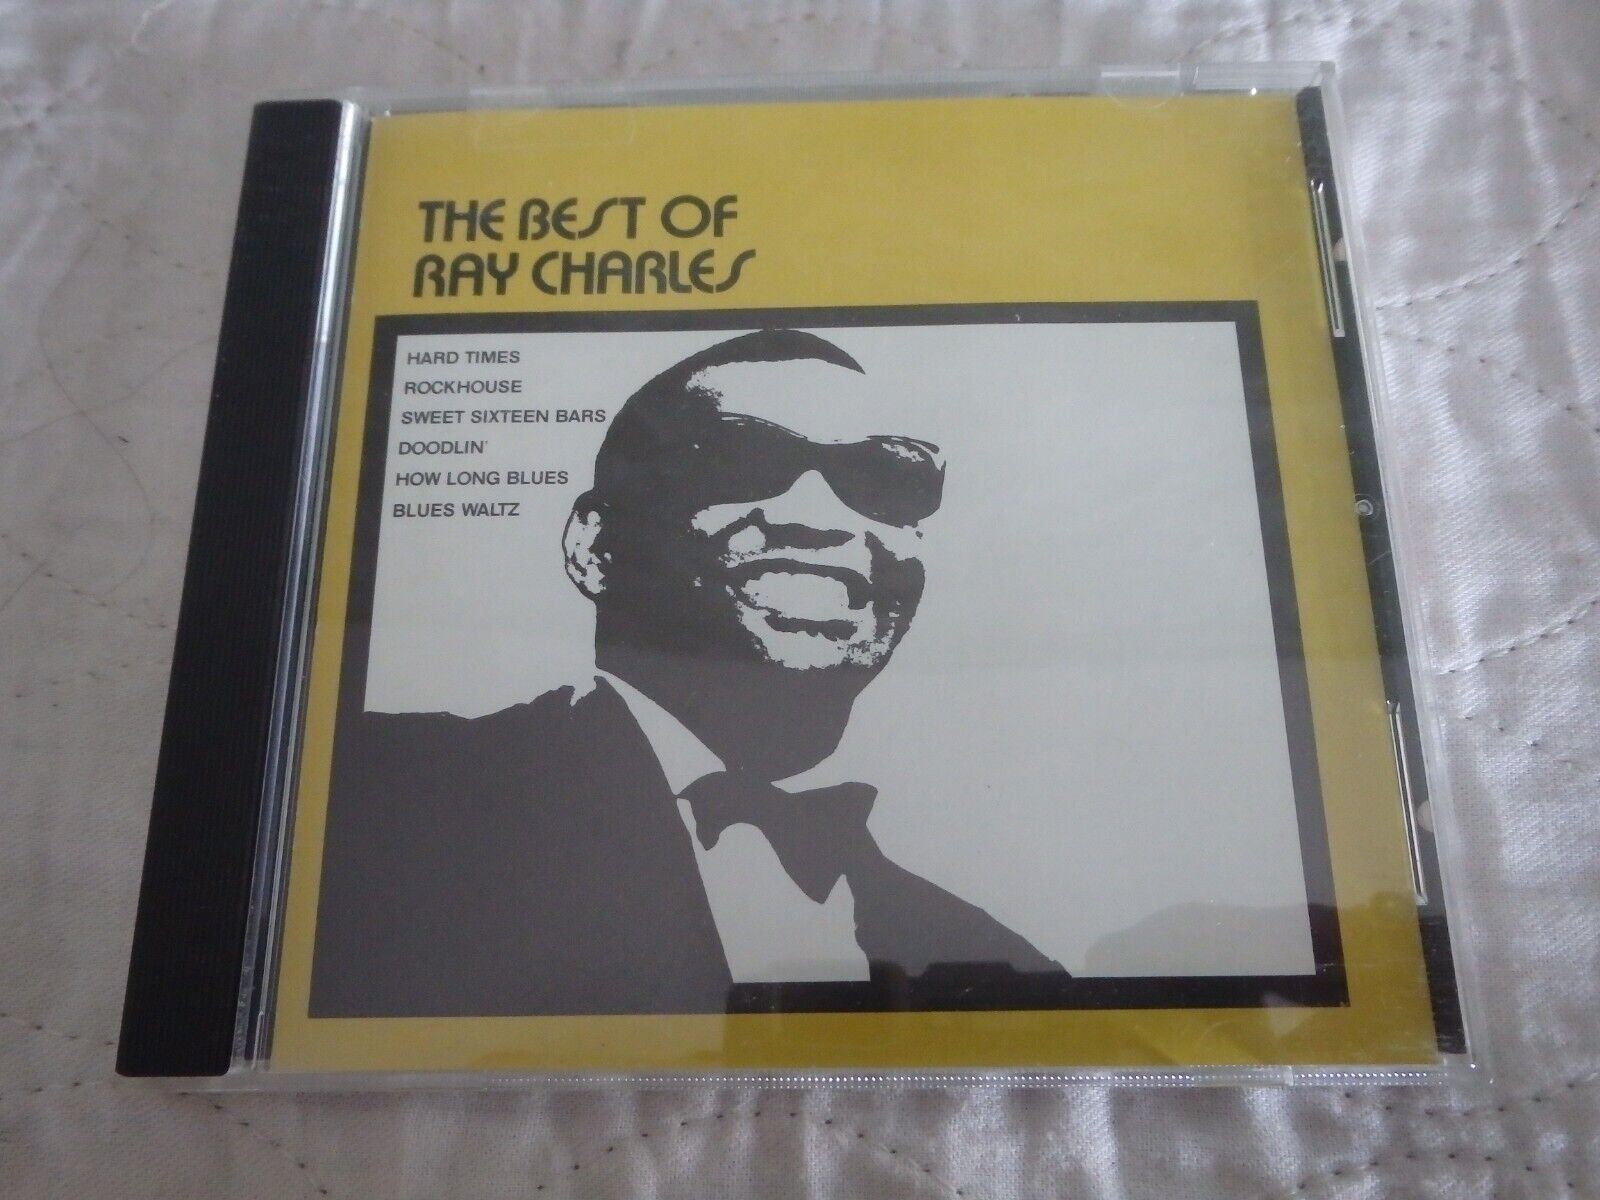 CD The Best of Ray Charles [Atlantic] by Ray Charles